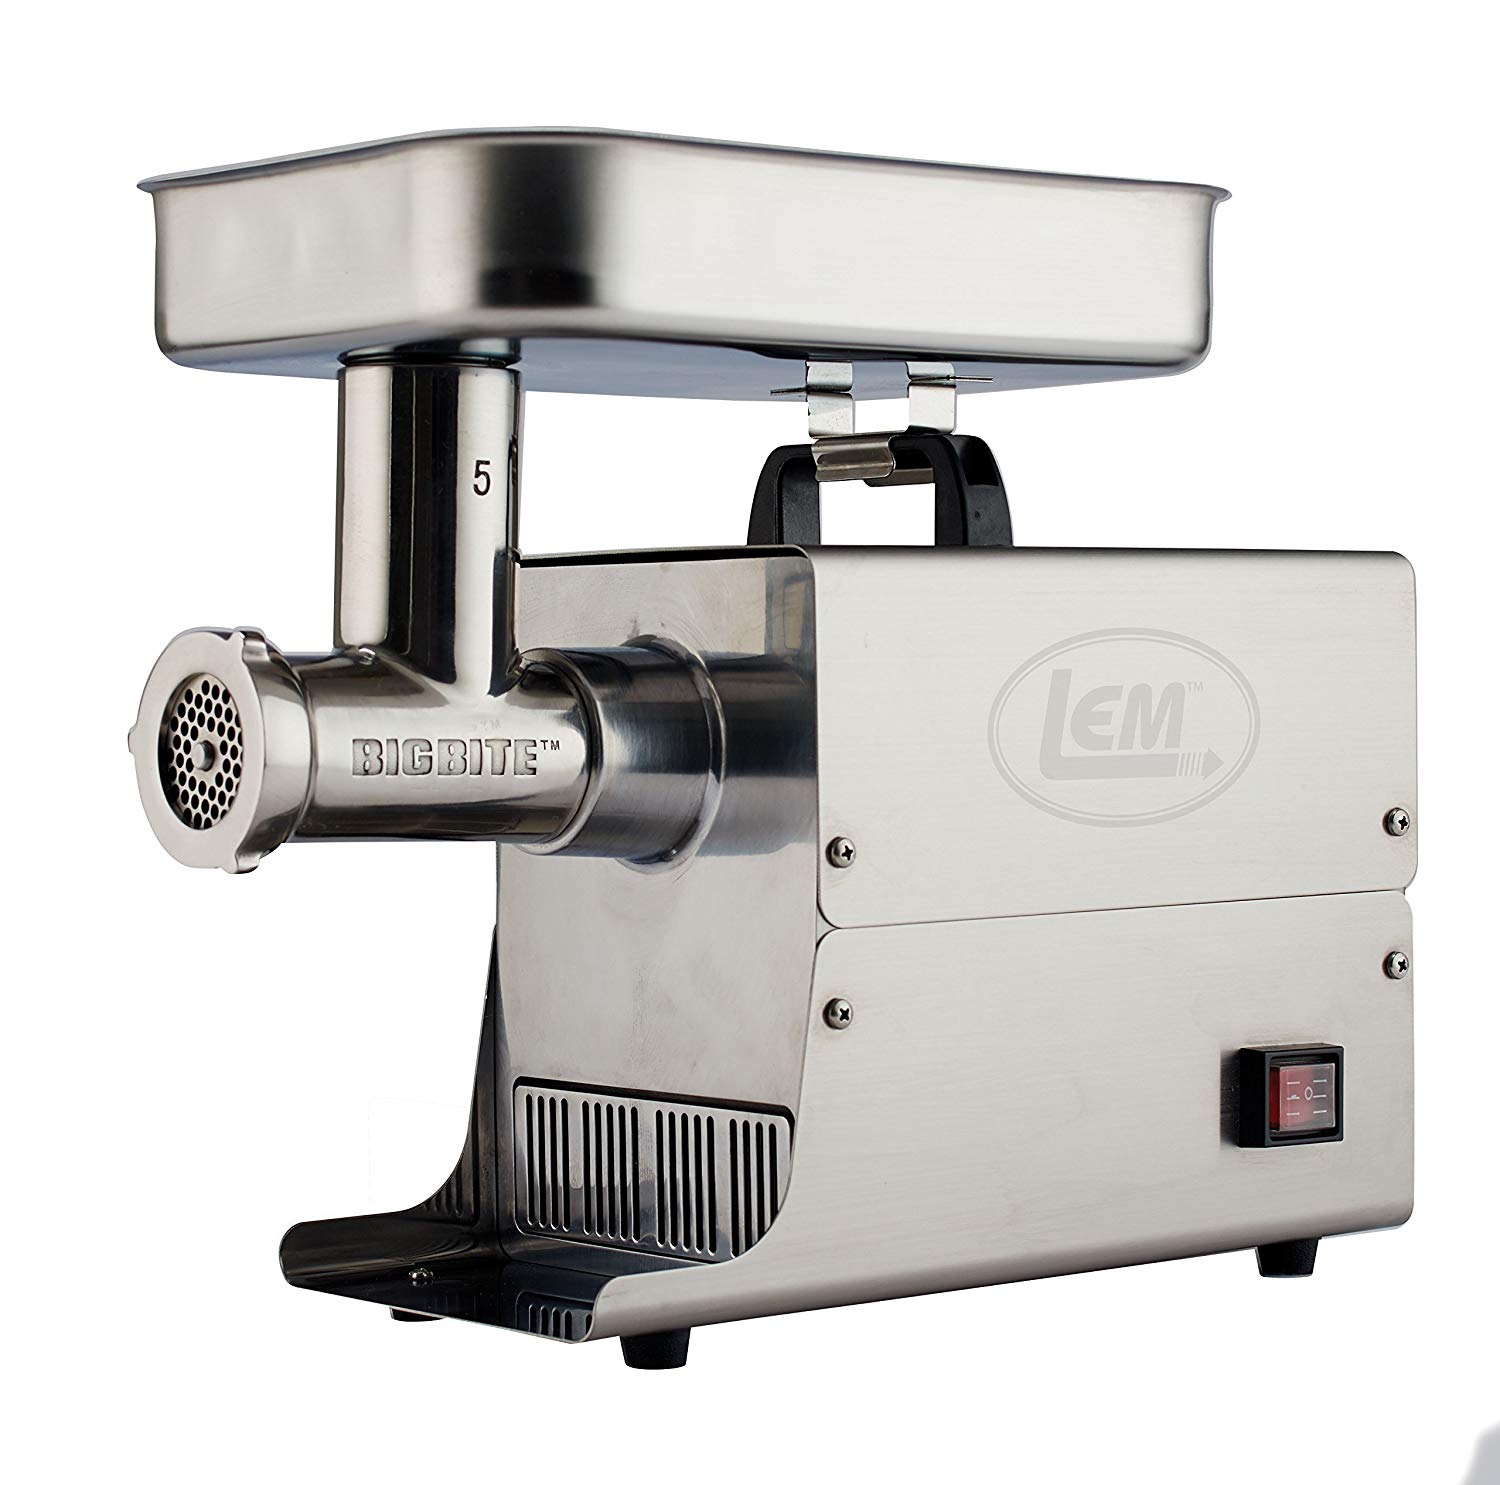 LEM Products #5 Stainless Steel Big Bite Electric Meat Grinder